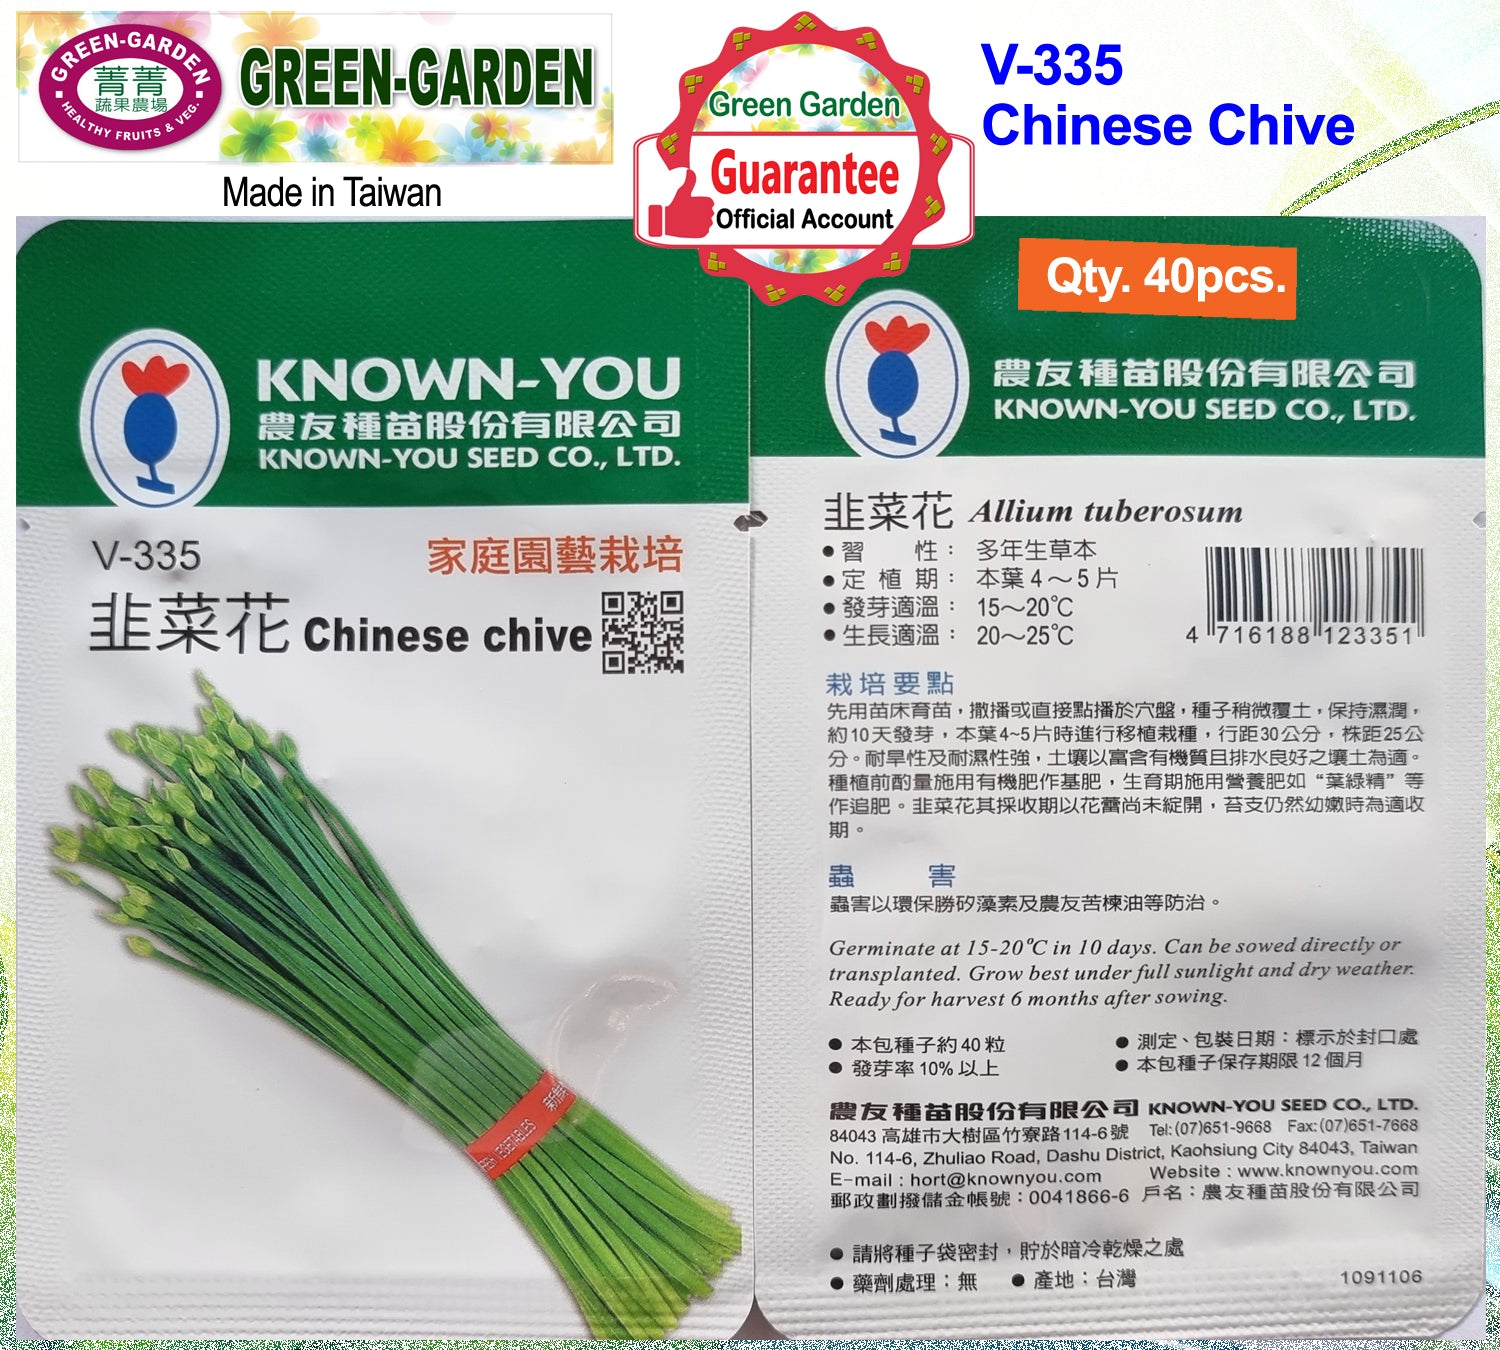 Known You Vegetable Seeds (V-335 Chinese Chives)